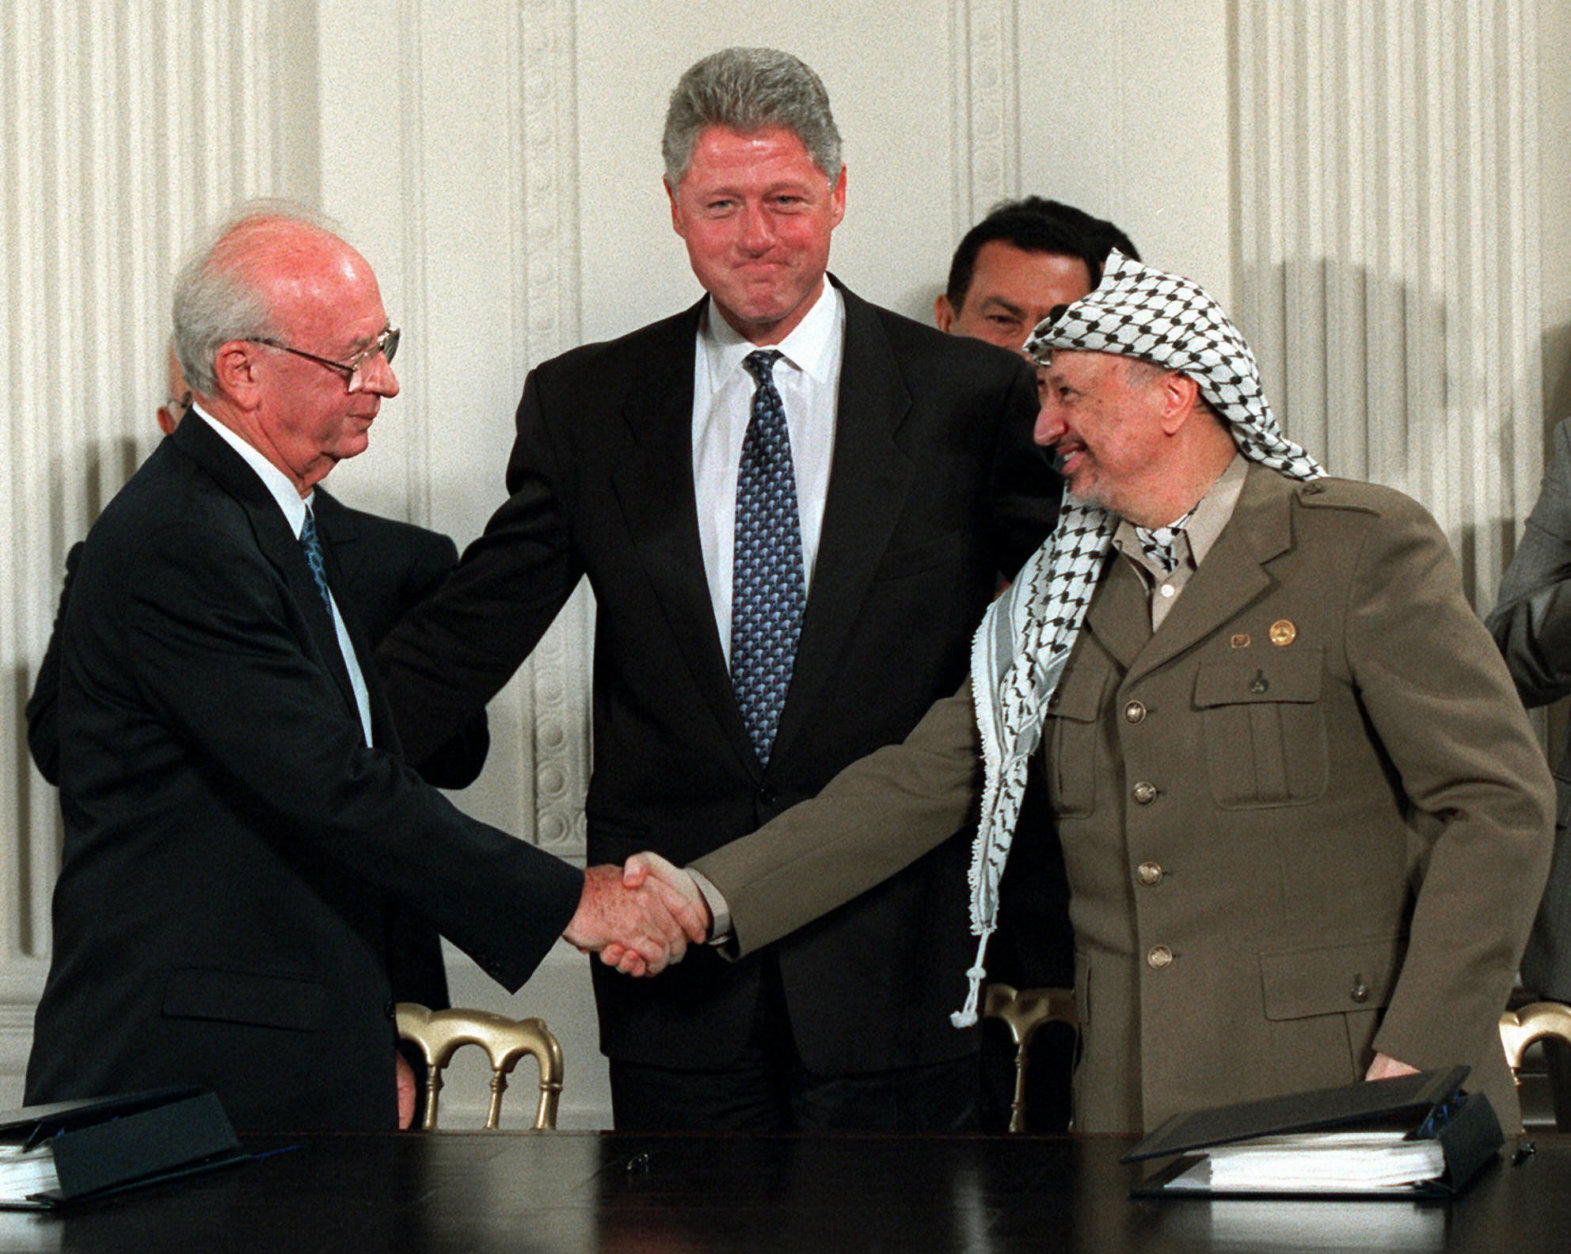 FILE - Sept. 28, 1995 file photo shows President Bill Clinton gesturing toward Israeli Prime Minister Yitzhak Rabin, left, and PLO leader Yasser Arafat shaking hands in the East Room of the White House  after the Mideast accord signing. The contours of an Israeli-Palestinian peace deal are clear, we are told. If only the two sides would finally summon up the vision, the will and the courage, then the outcome is largely preordained, it is said: Two states roughly along the pre-1967 borders with Jerusalem as a shared capital and some elegant solution for the Palestinian refugees.(AP Photo/Doug Mills, File)